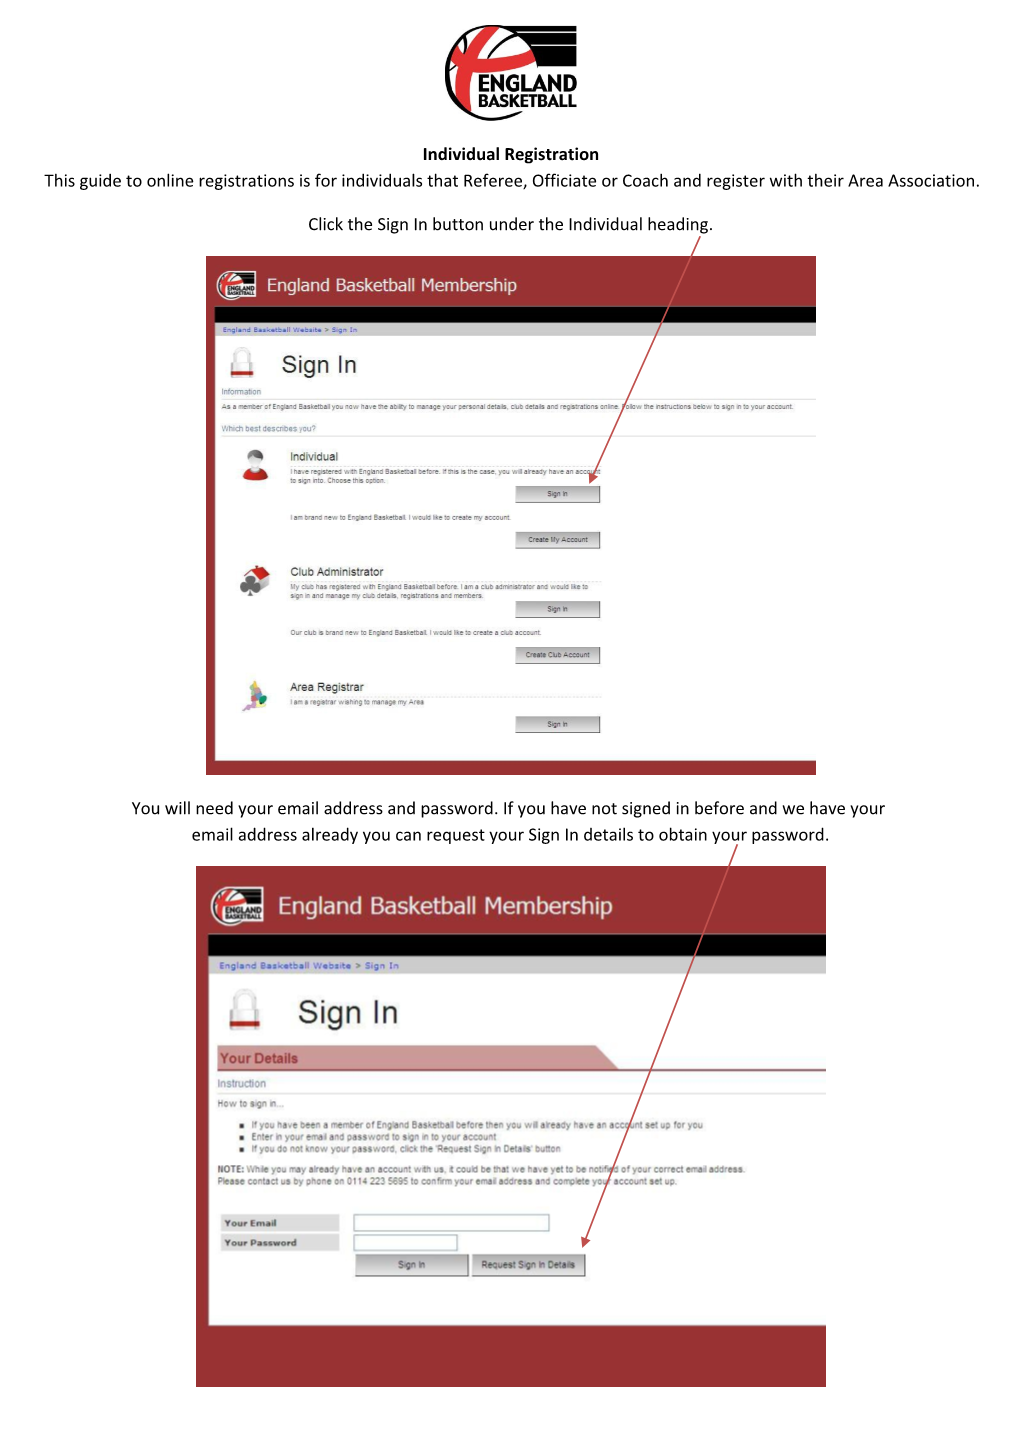 Enter Your Email and Click Request Sign in Details